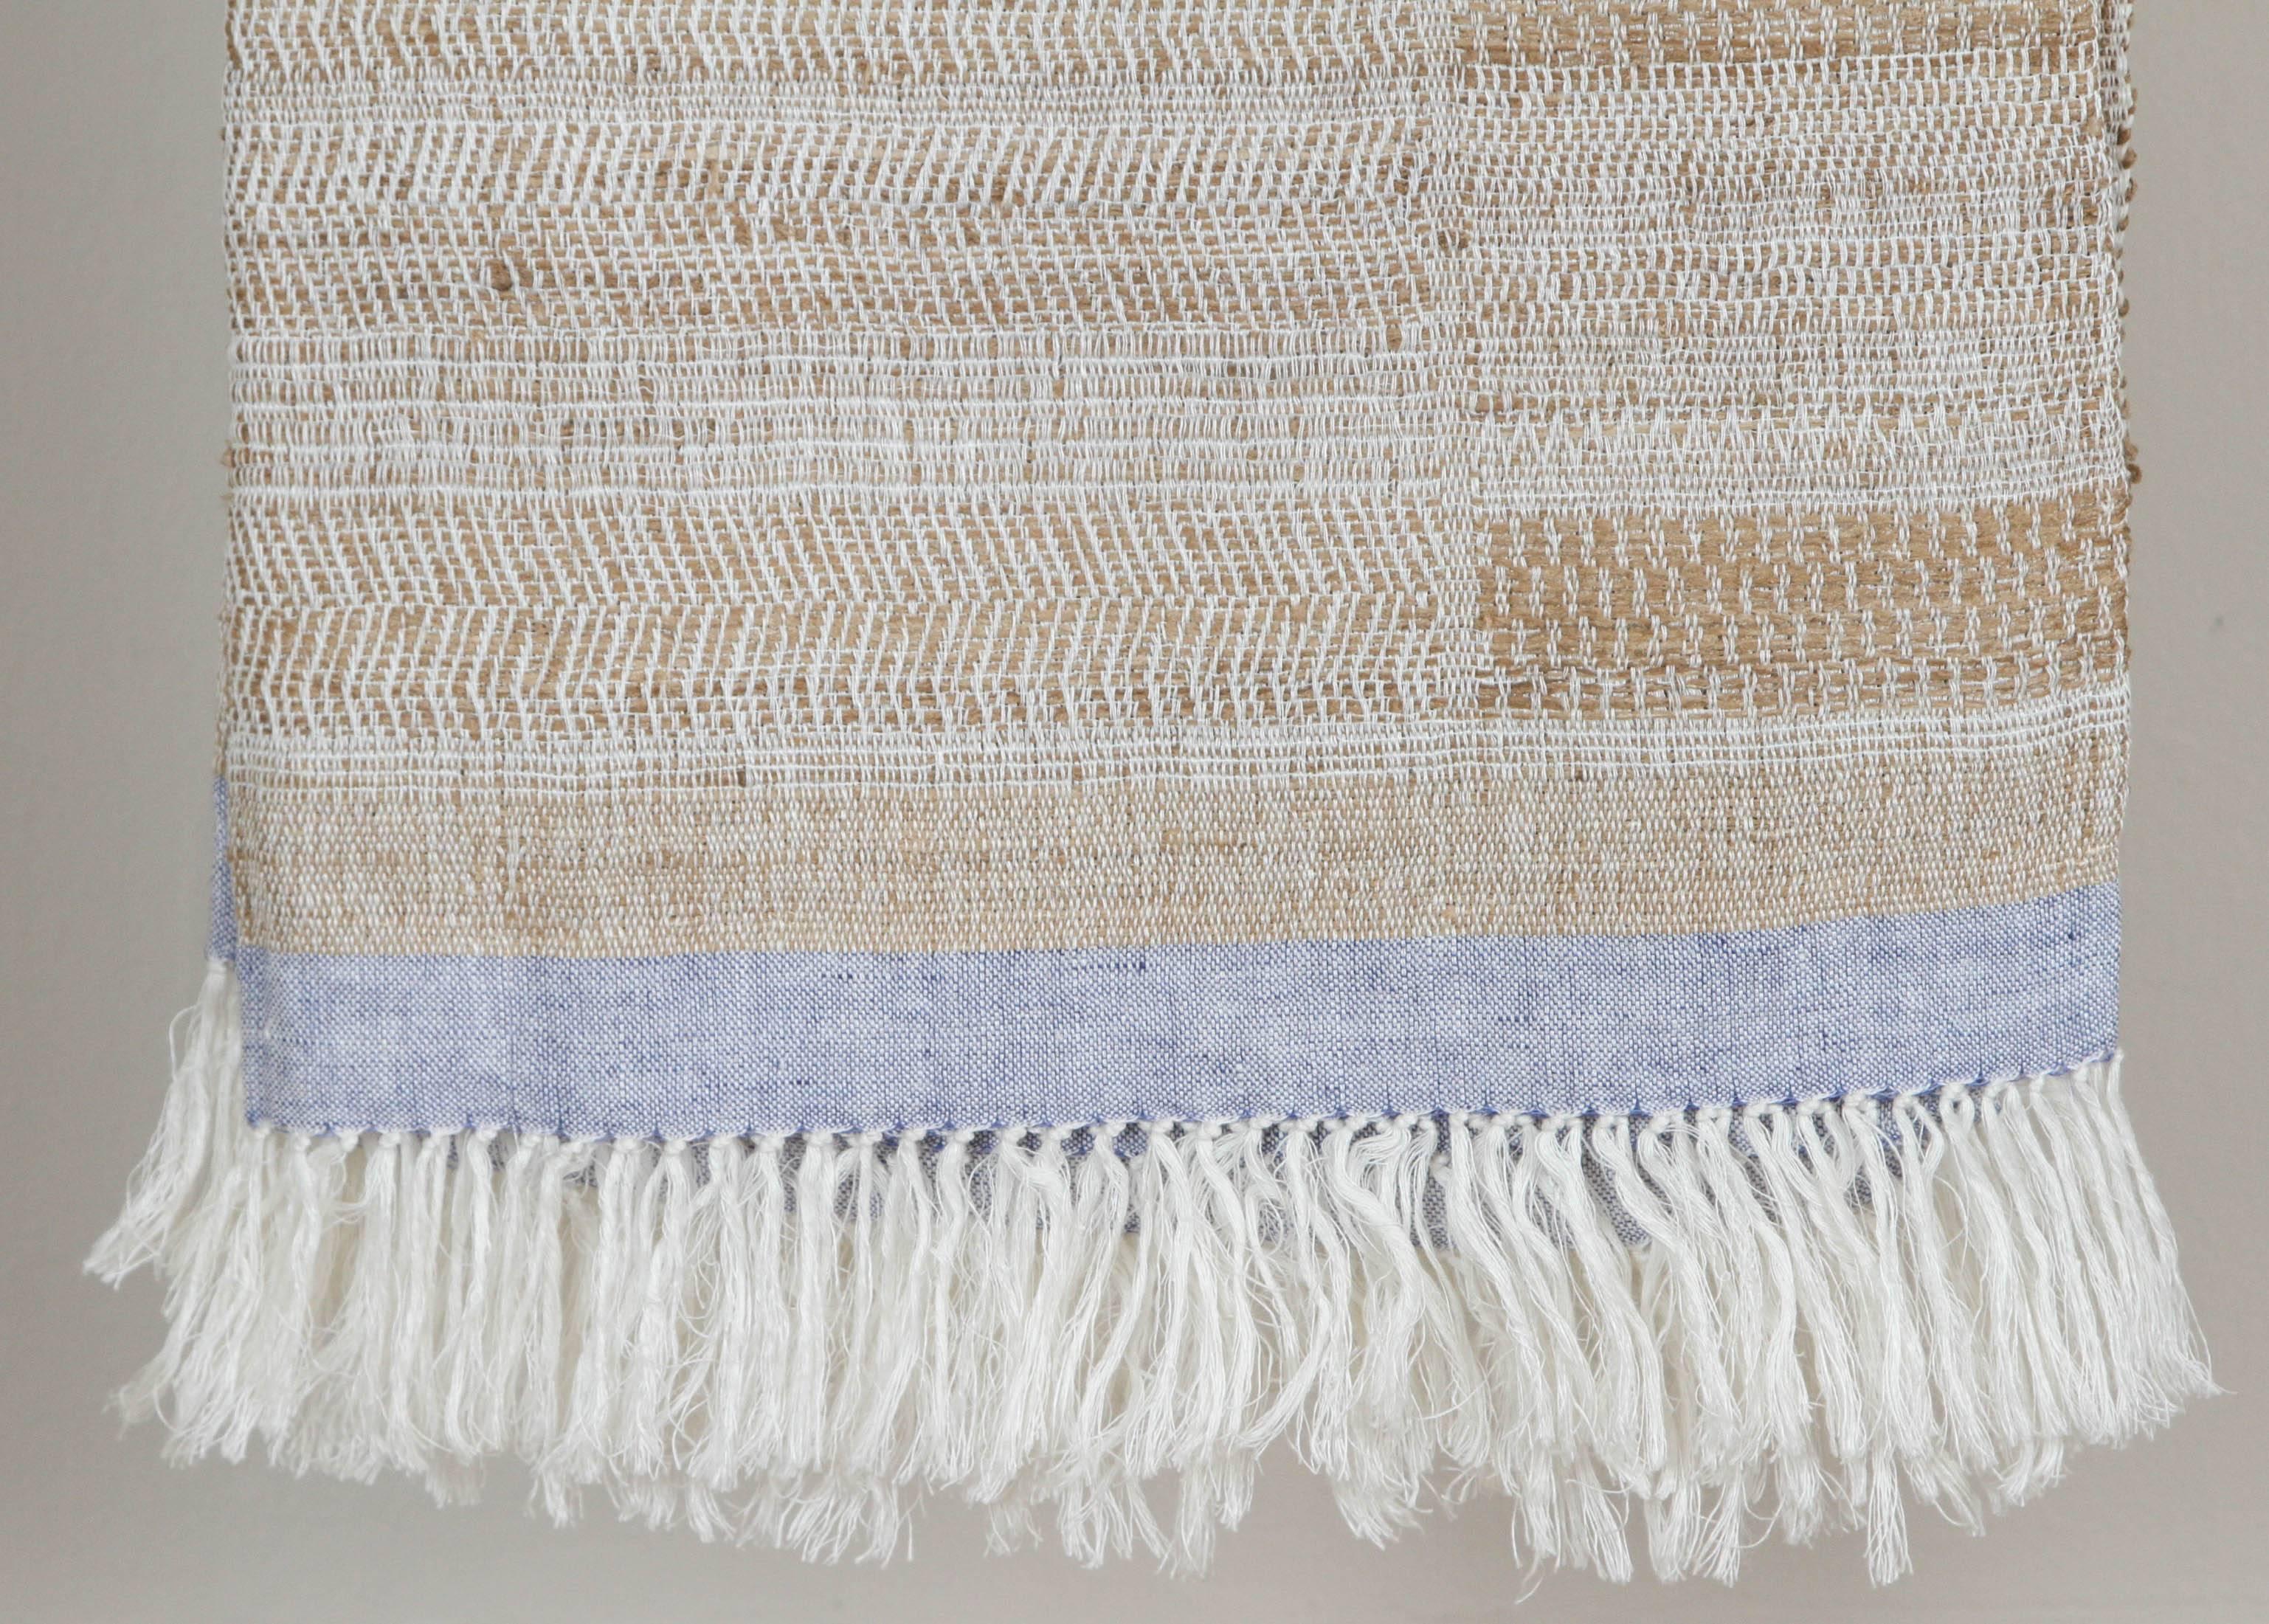 A contemporary line of cushions, pillows, throws, bedcovers, bedspreads and yardage handwoven in India on antique Jacquard looms. Handspun wool, cotton, linen, and raw silk give the textiles an appealing uneven quality.  The above throw is linen and